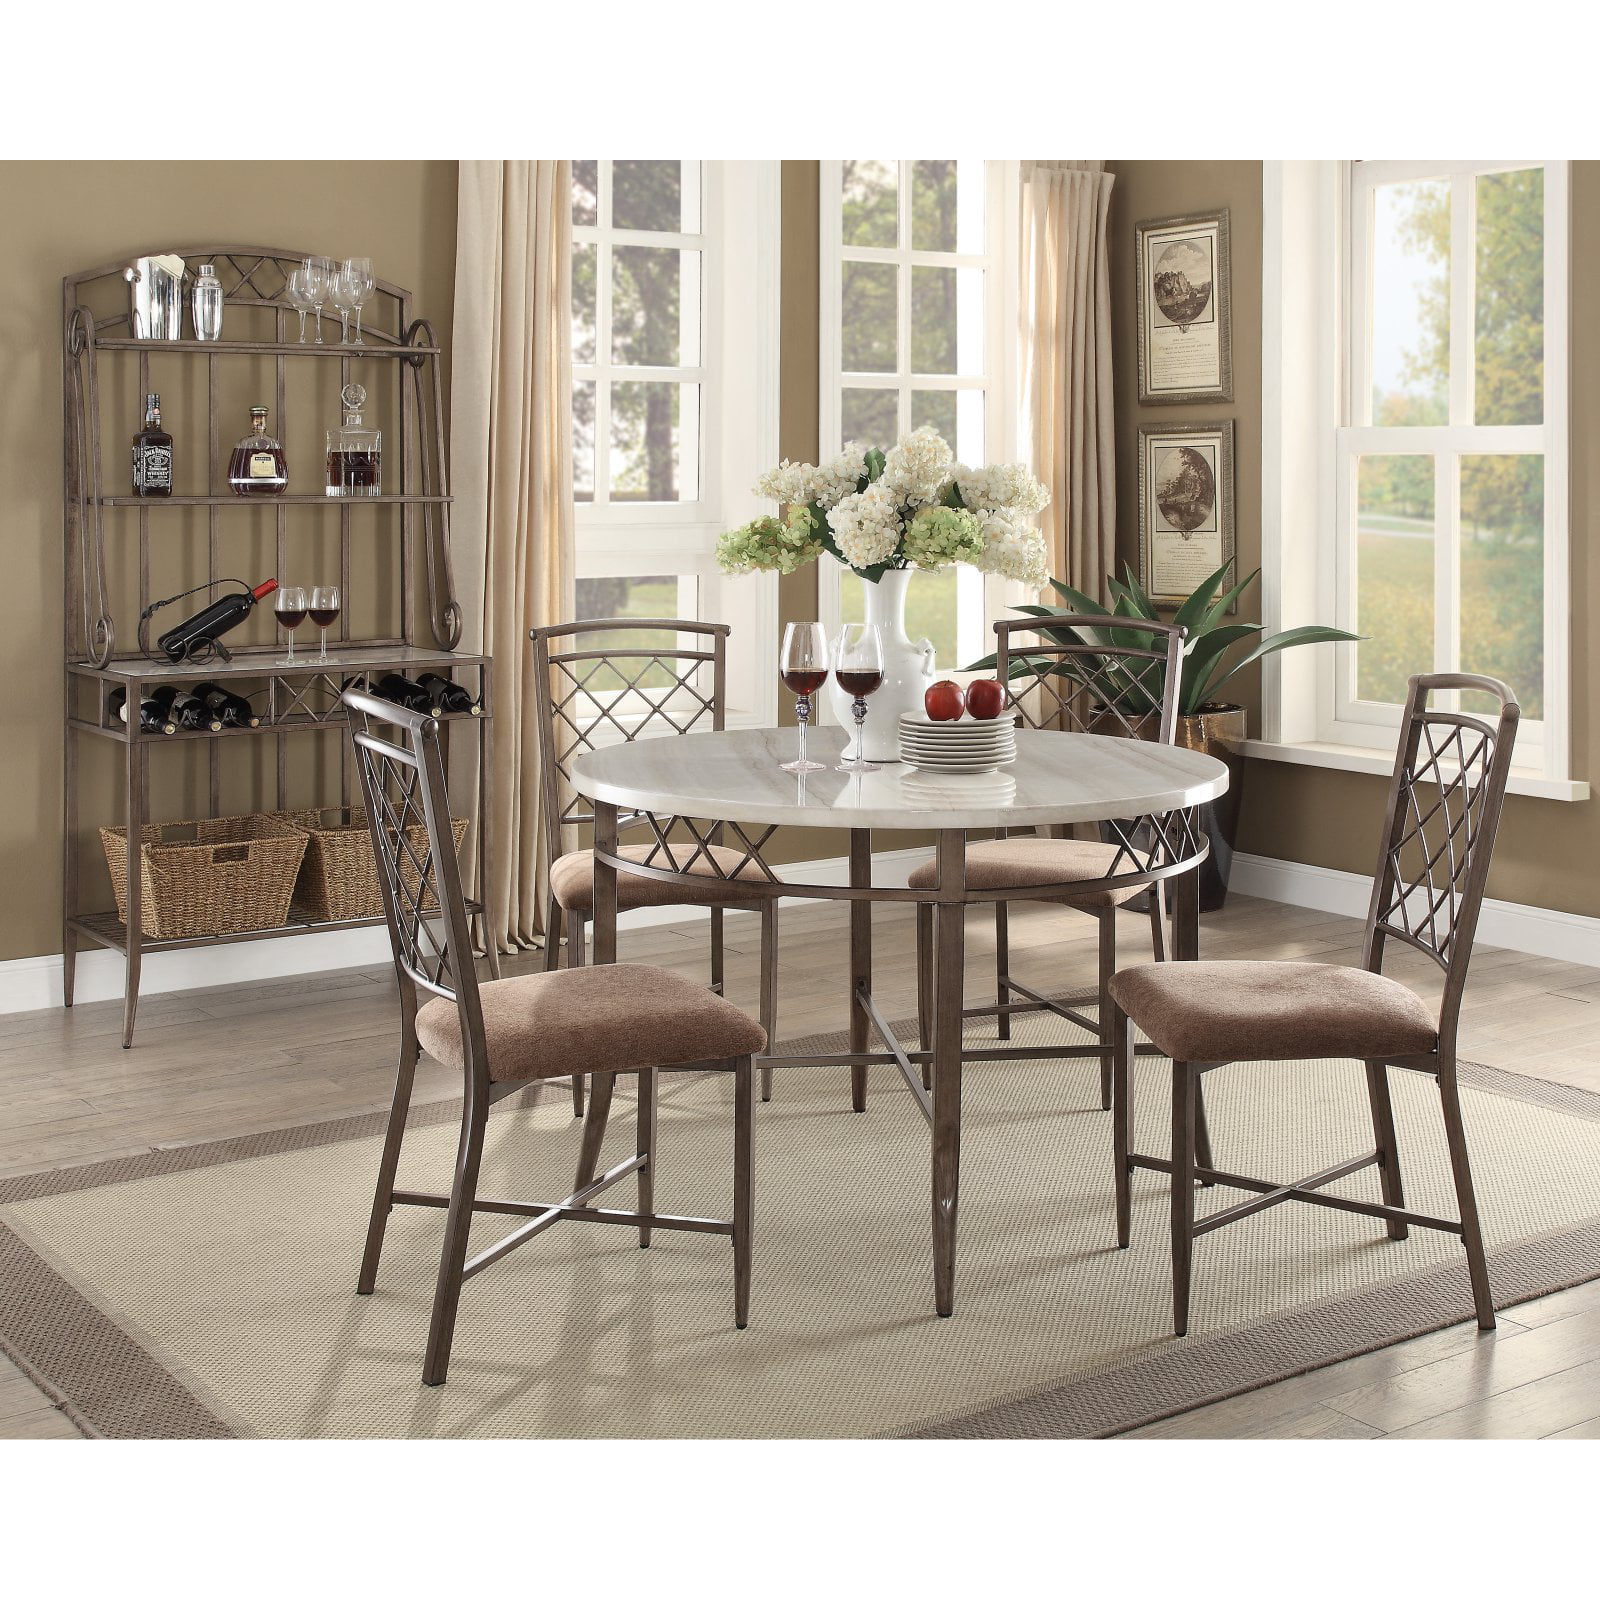 Acme Furniture Aldric Dining Table, Antique Metal Kitchen Table And Chairs